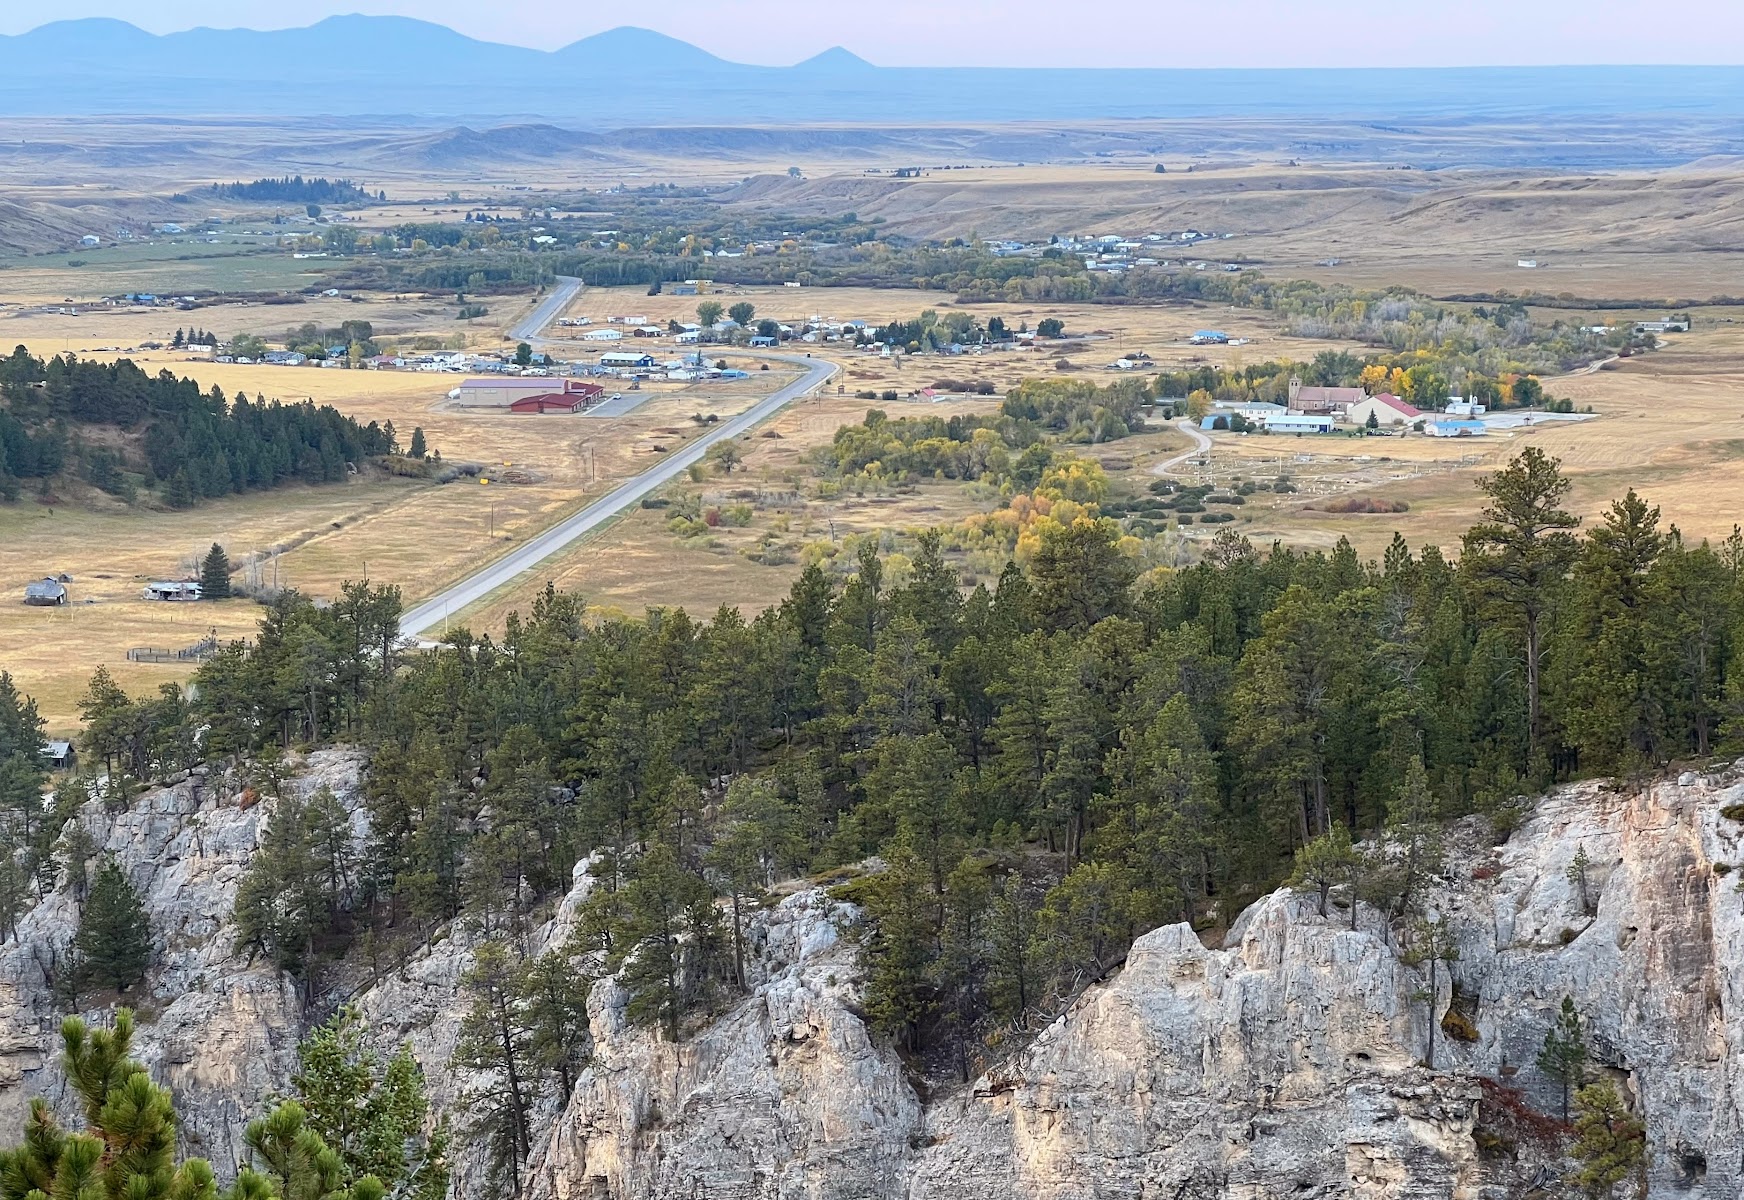 Overlooking the community of Hays, a road leads into the valley. 